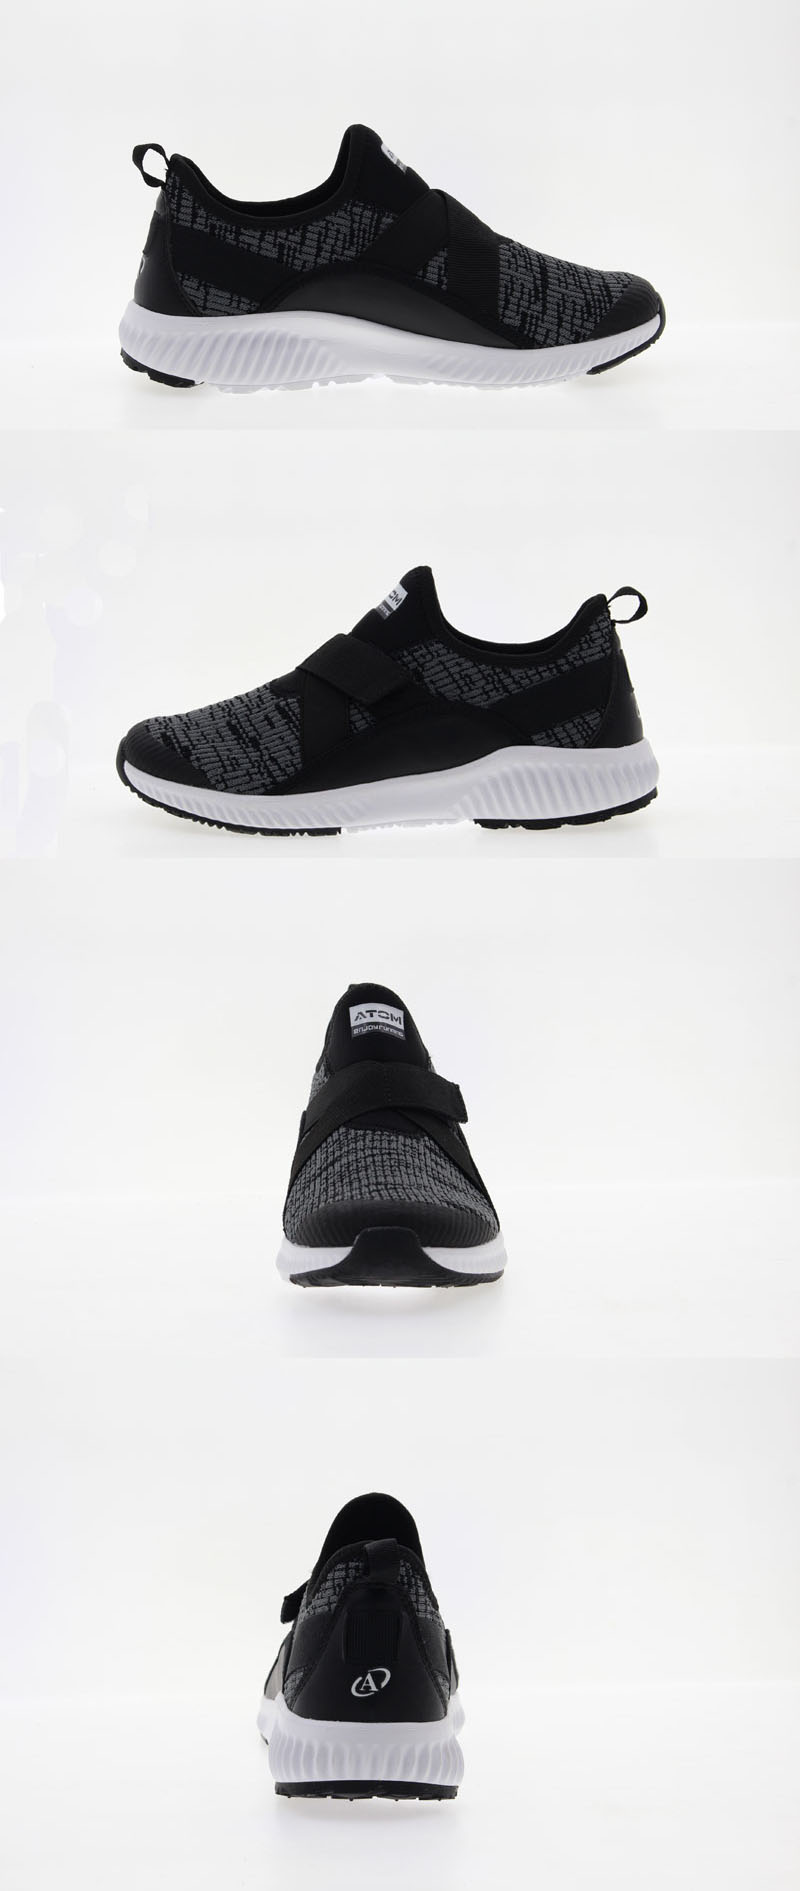 Black Carbon flykniting shoes